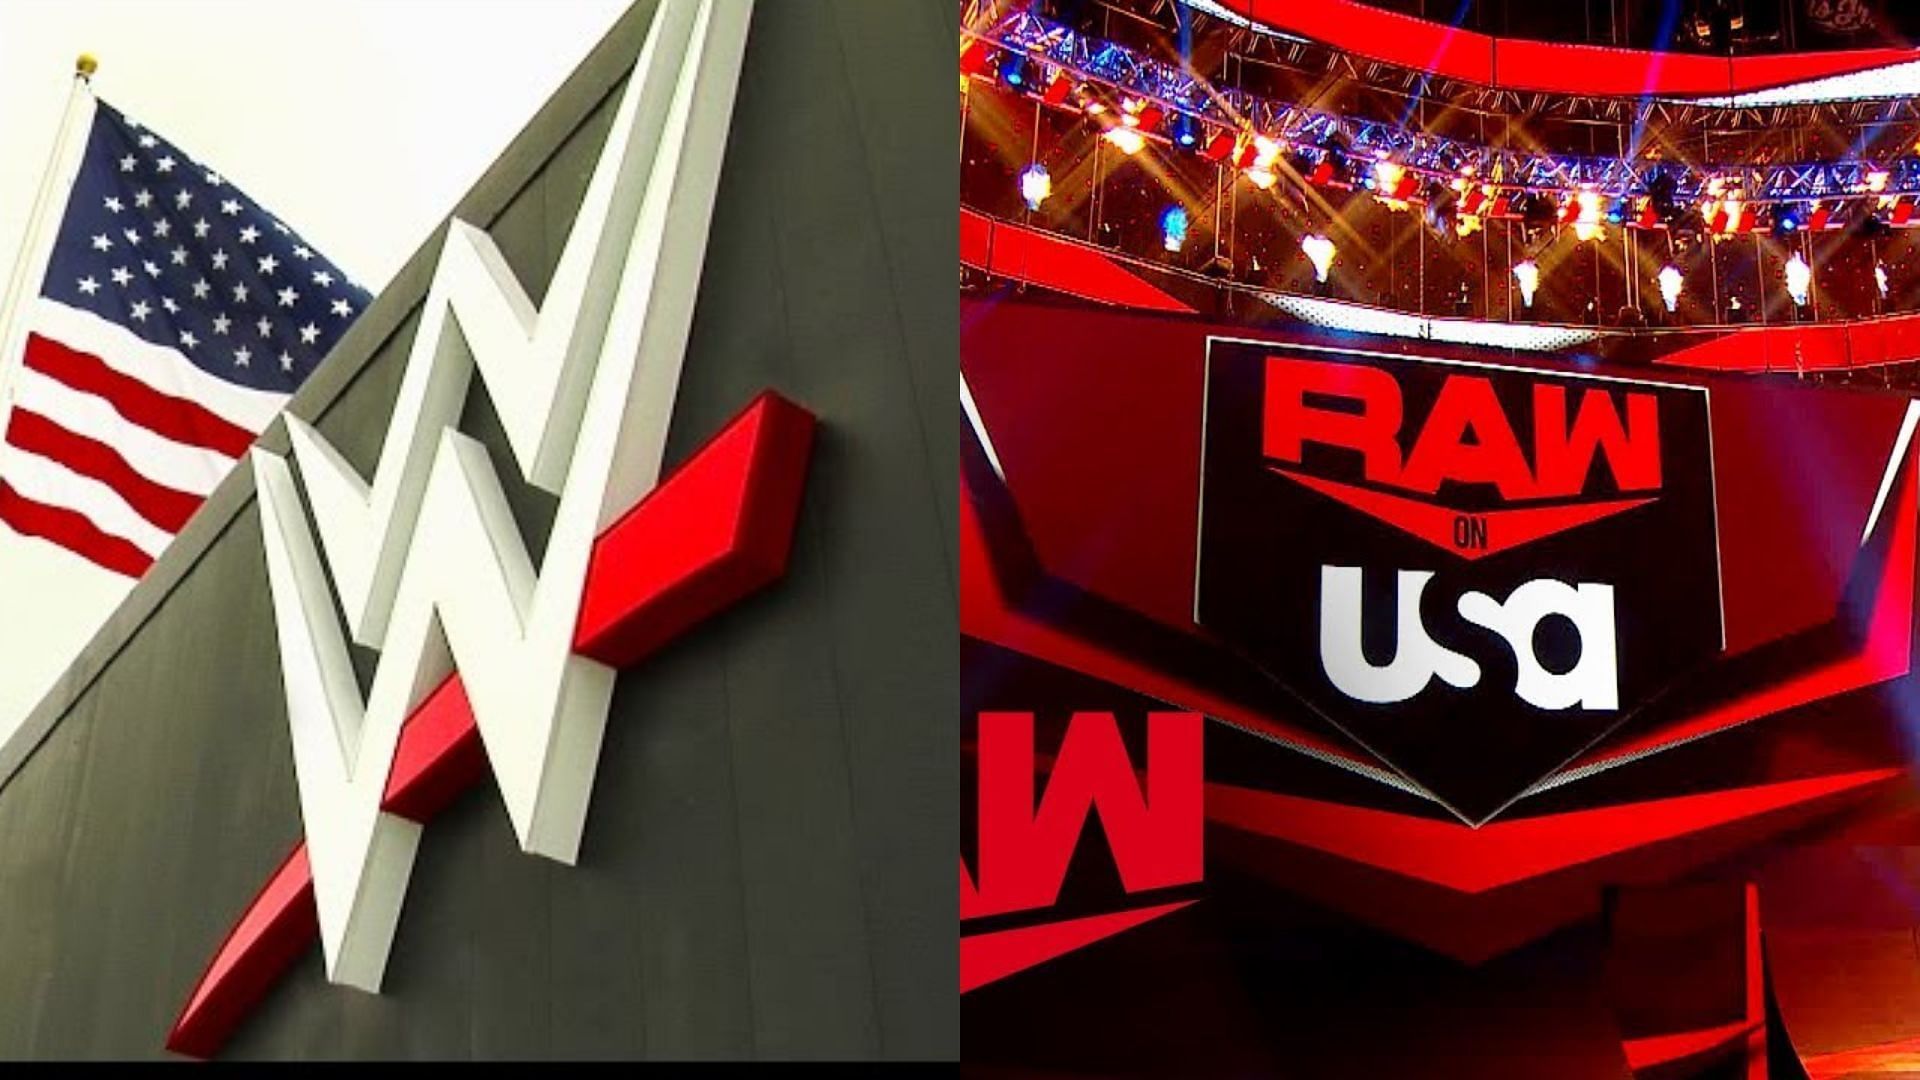 WWE RAW took place in Montreal this week